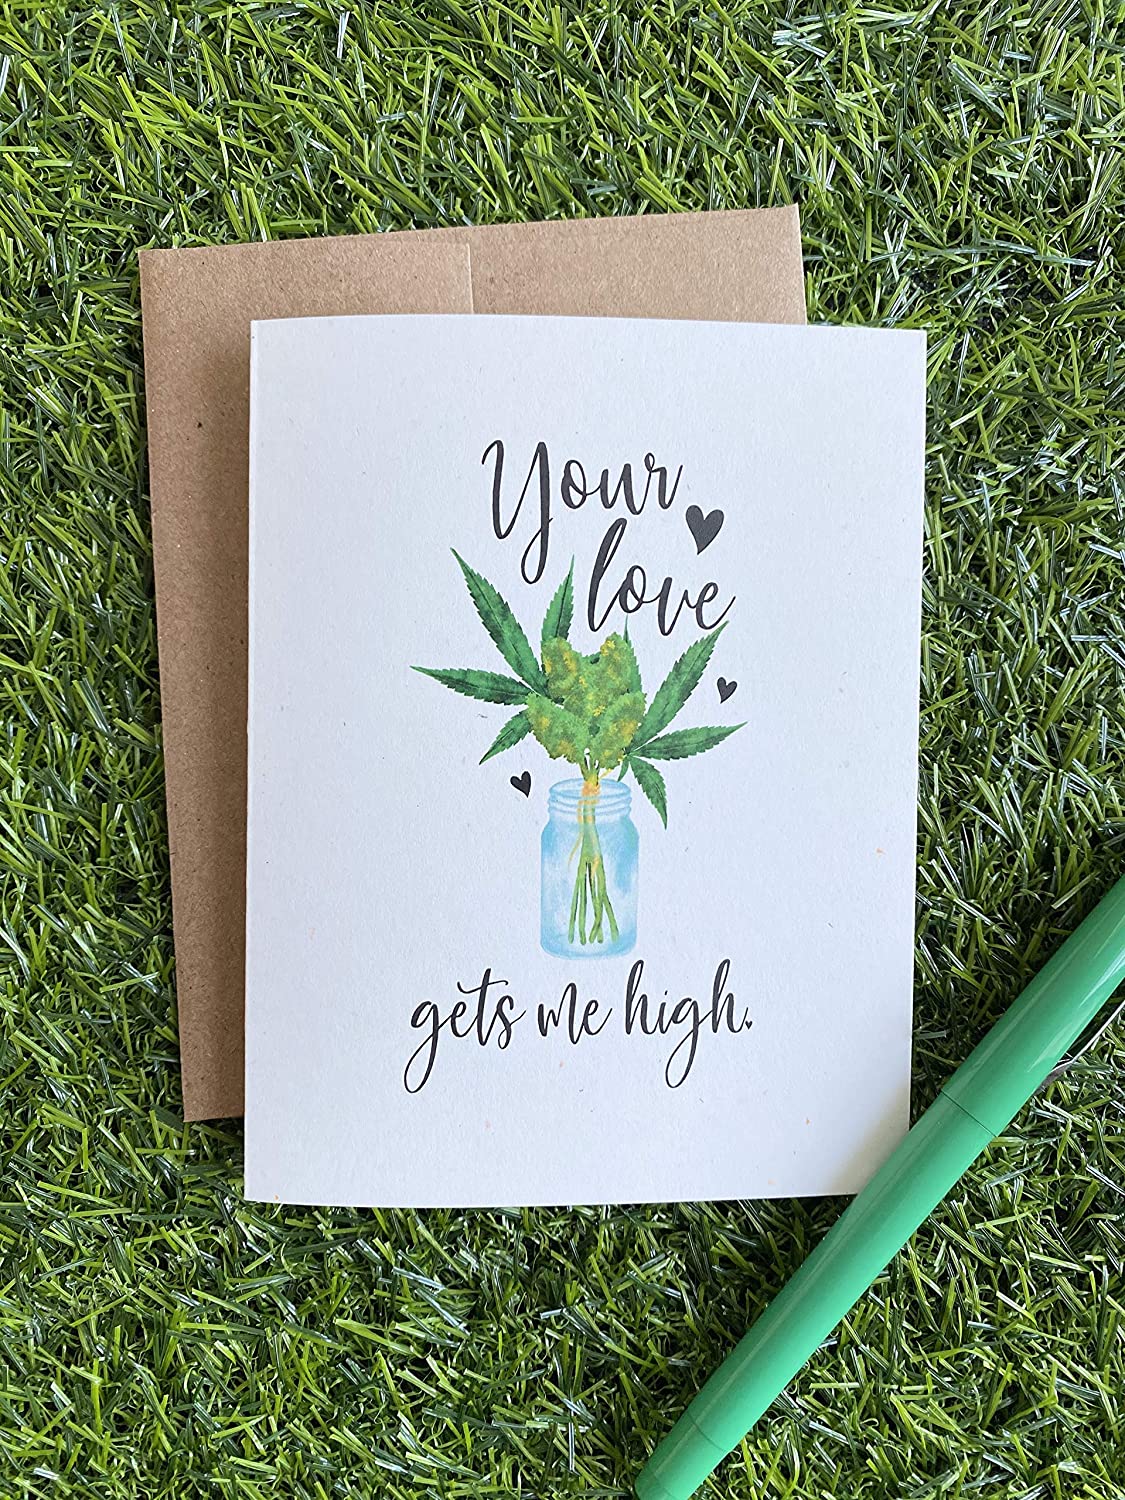 Cannabinthusiast | Cupid Approved Cannabis Gifts for Valentine’s Day - Cannabis Greeting Card